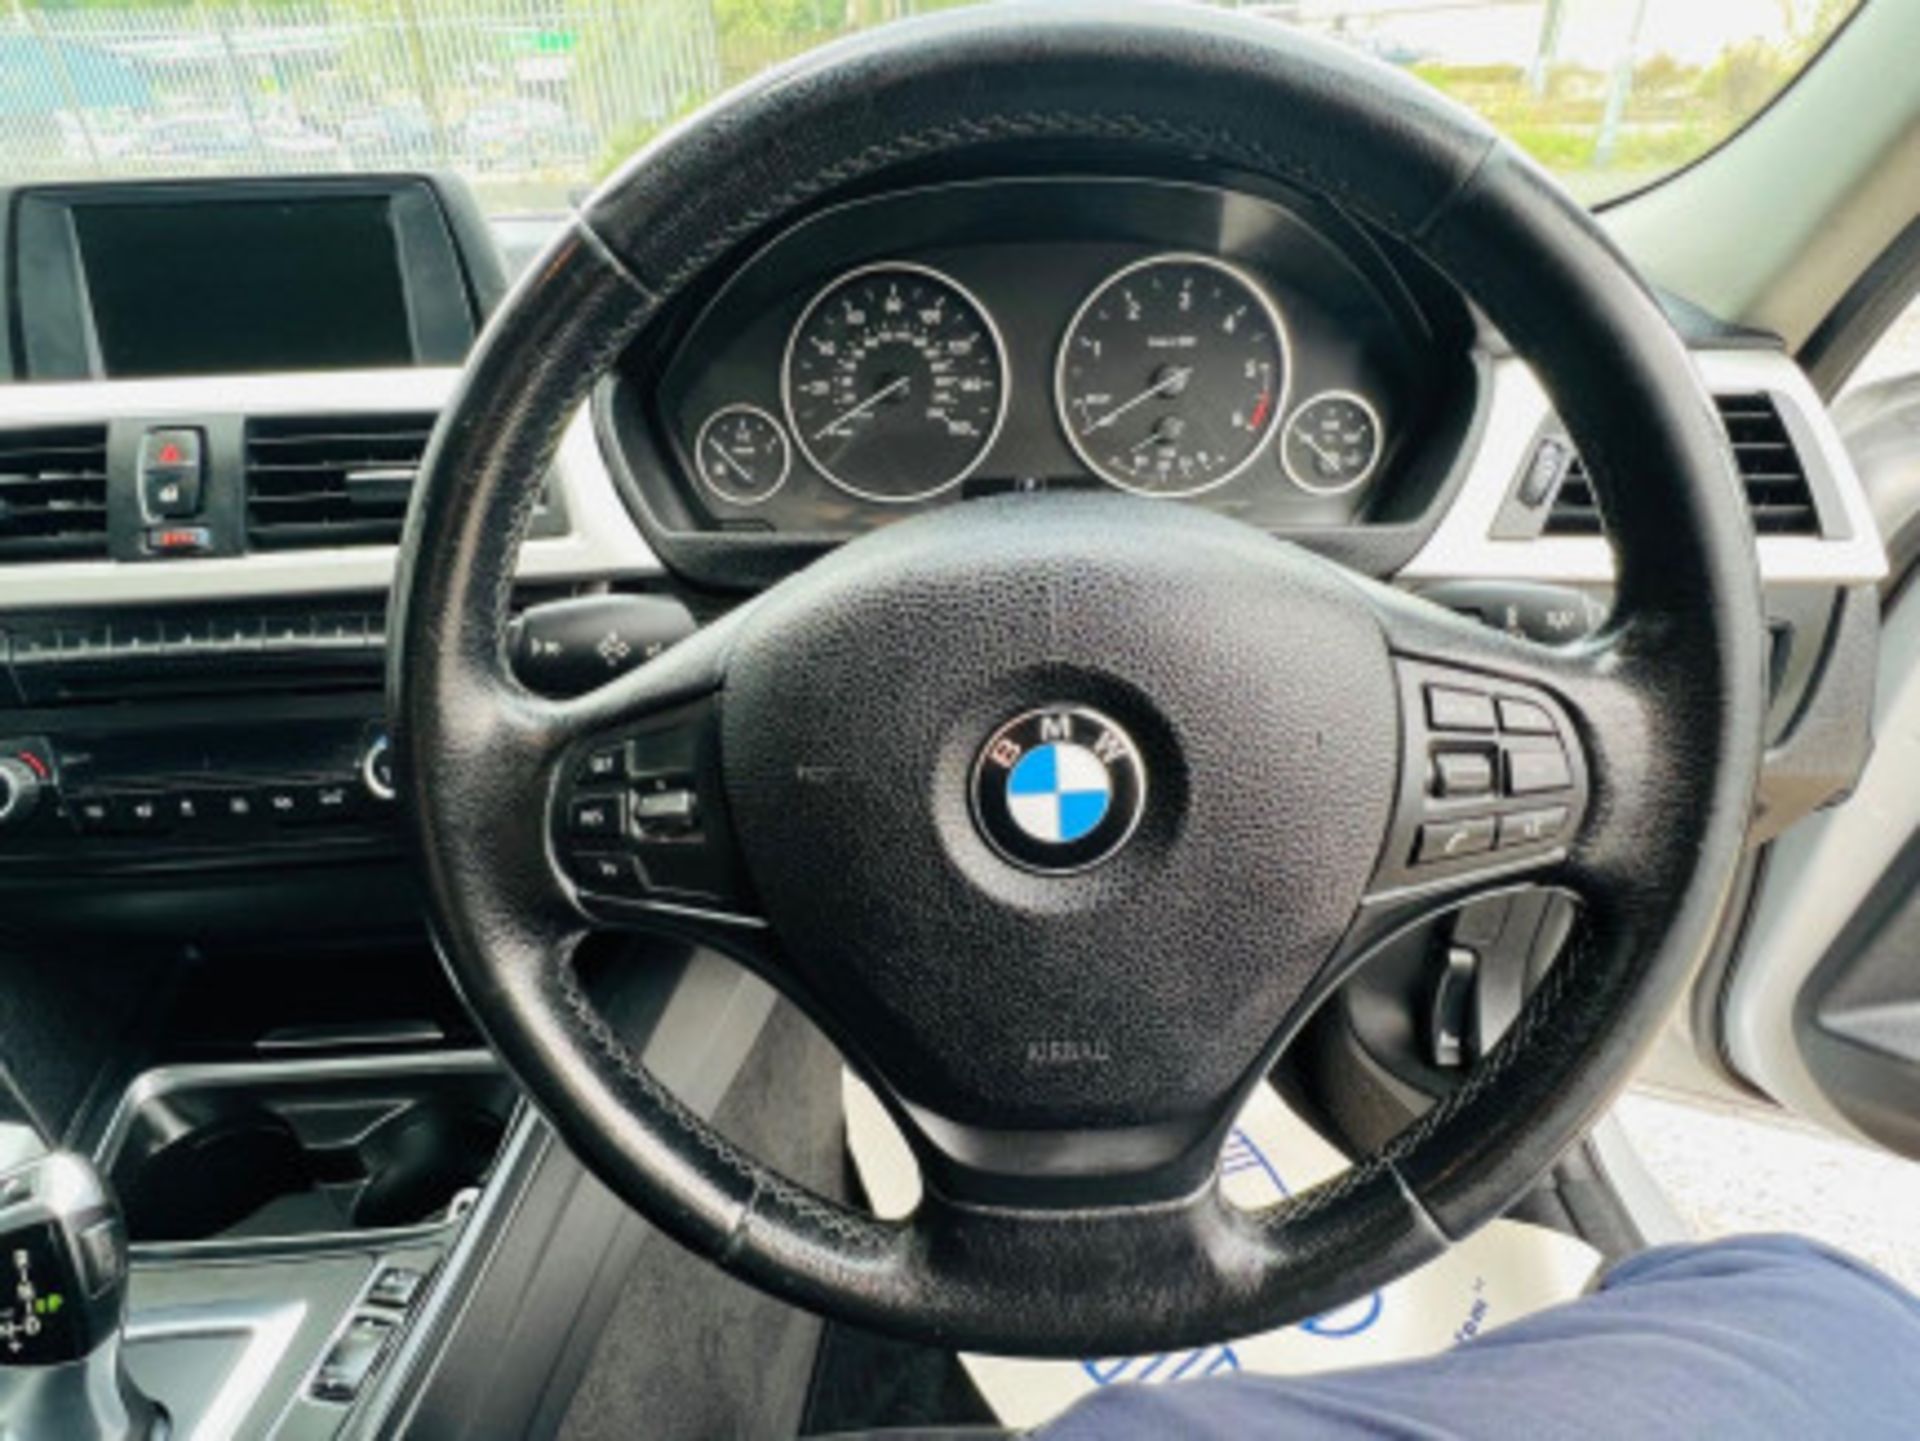 BMW 3 SERIES 2.0 DIESEL ED START STOP - A WELL-MAINTAINED GEM >>--NO VAT ON HAMMER--<< - Image 43 of 229